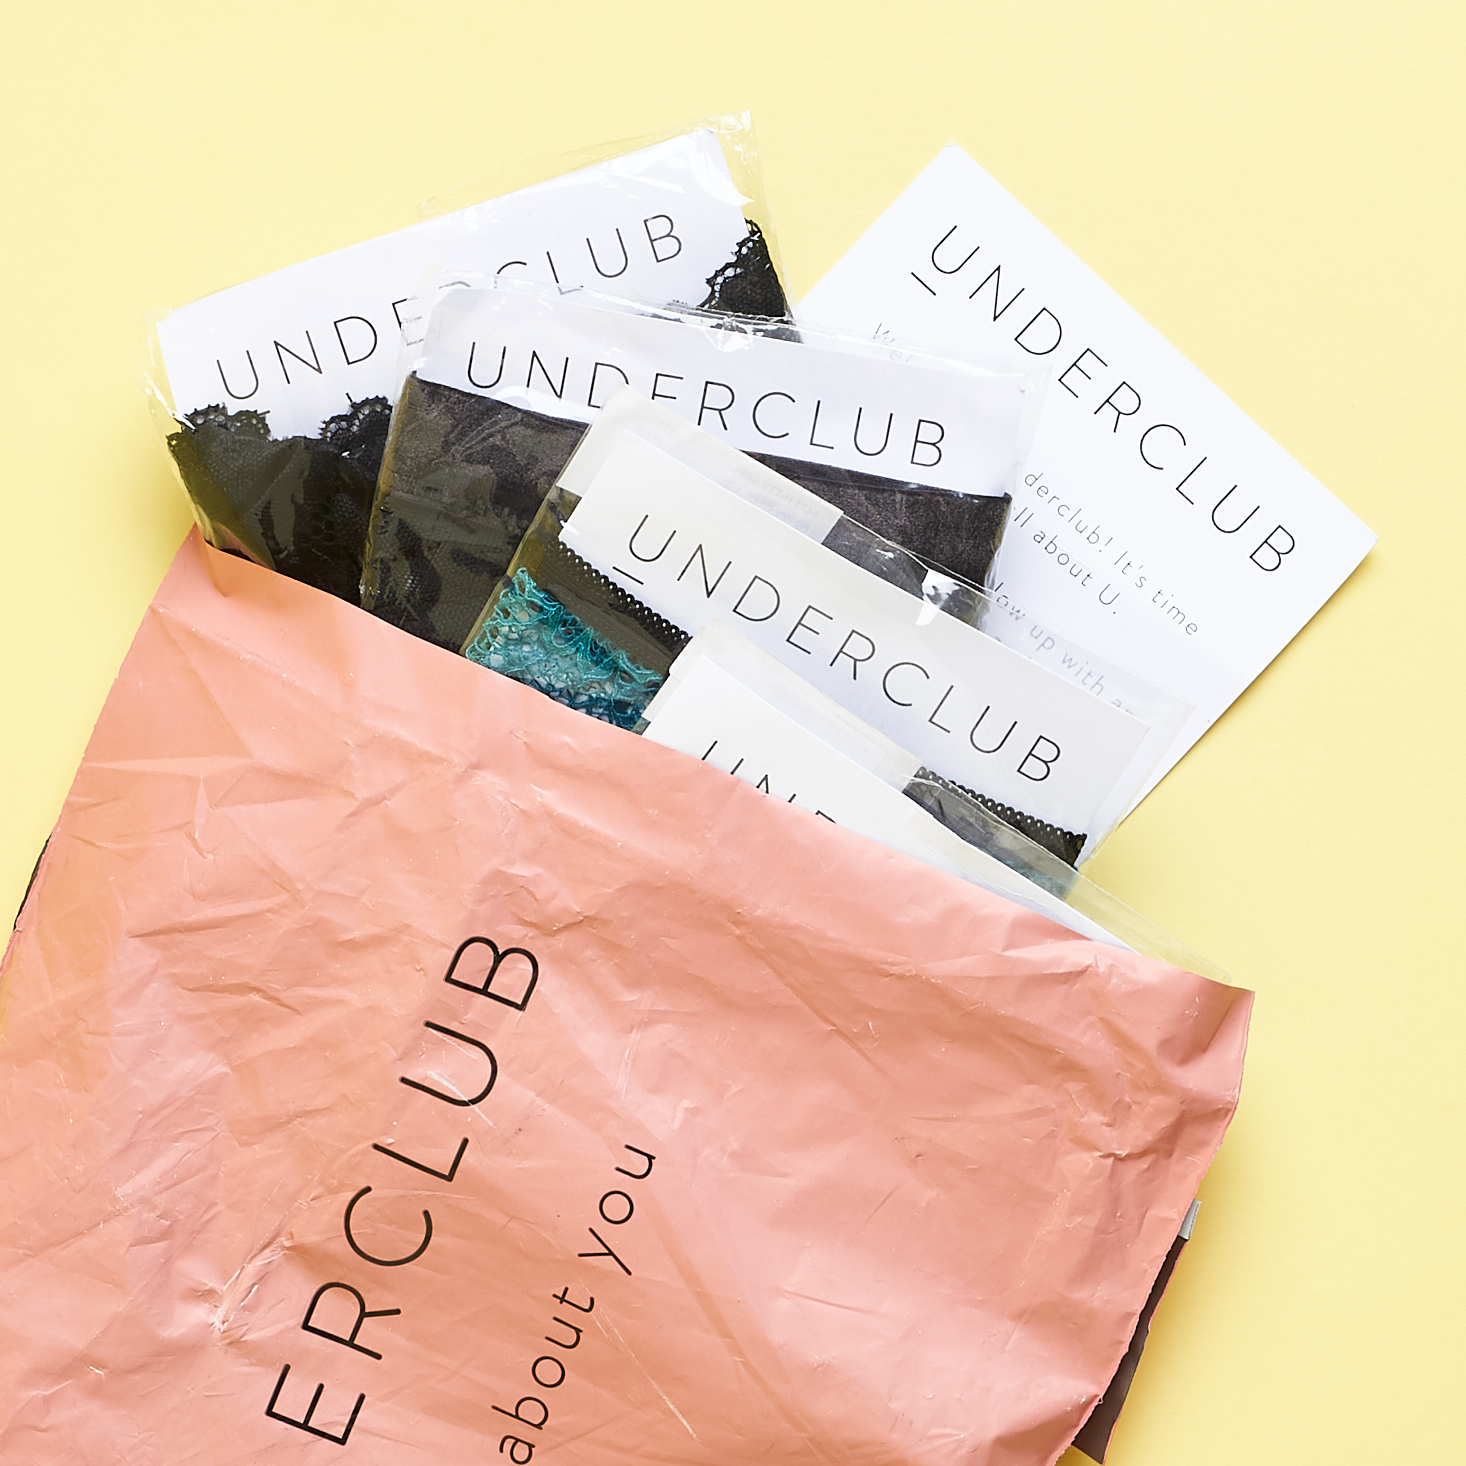 Underclub mailer pouch with contents peeking out